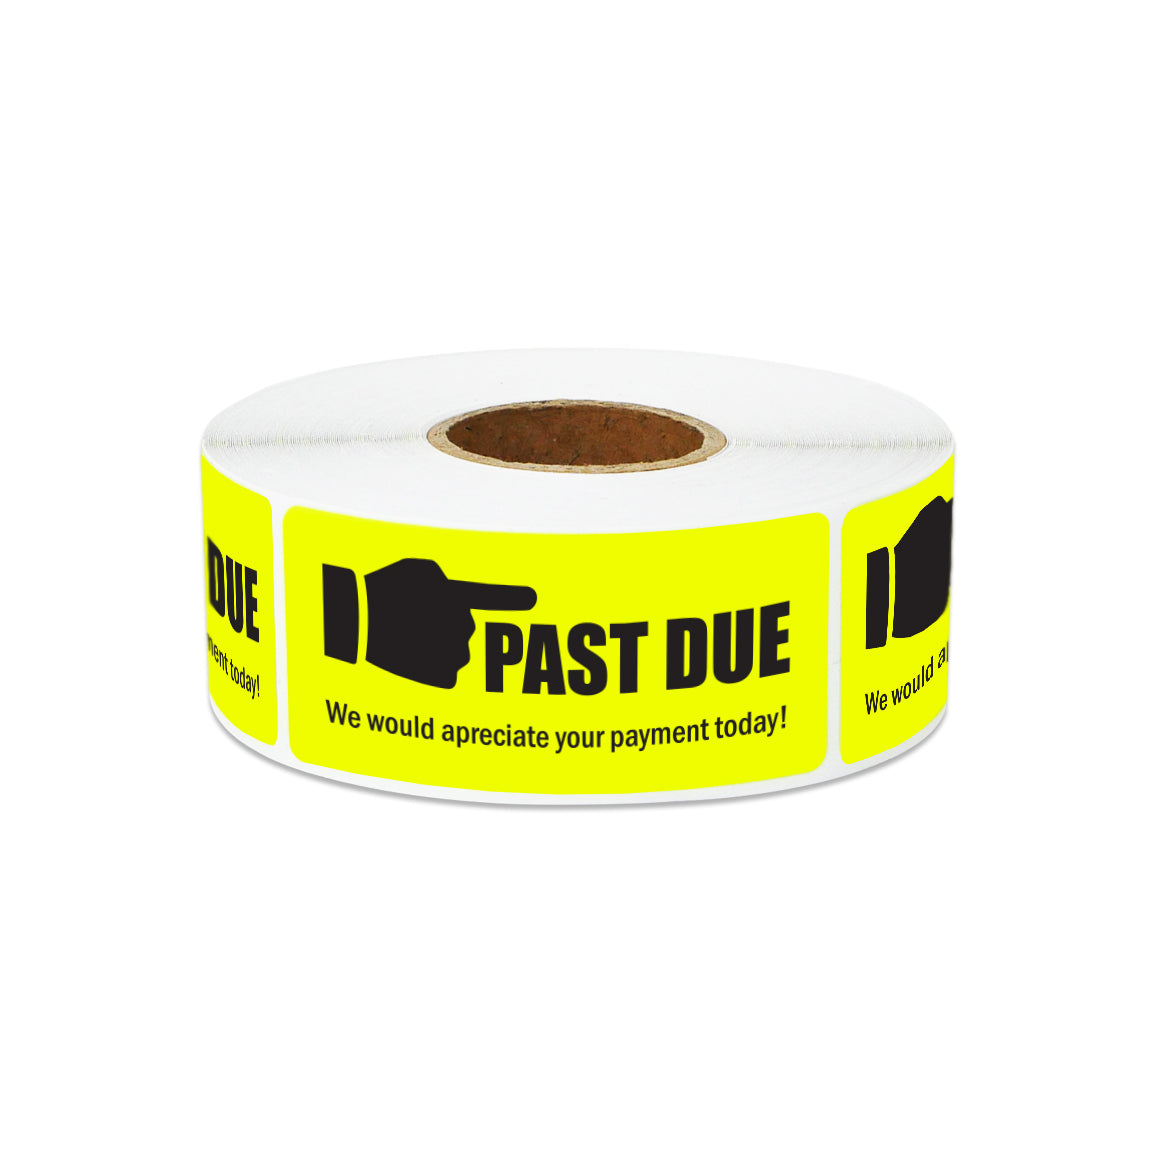 2.25 x 1 inch | Billing & Collections: Past Due Stickers